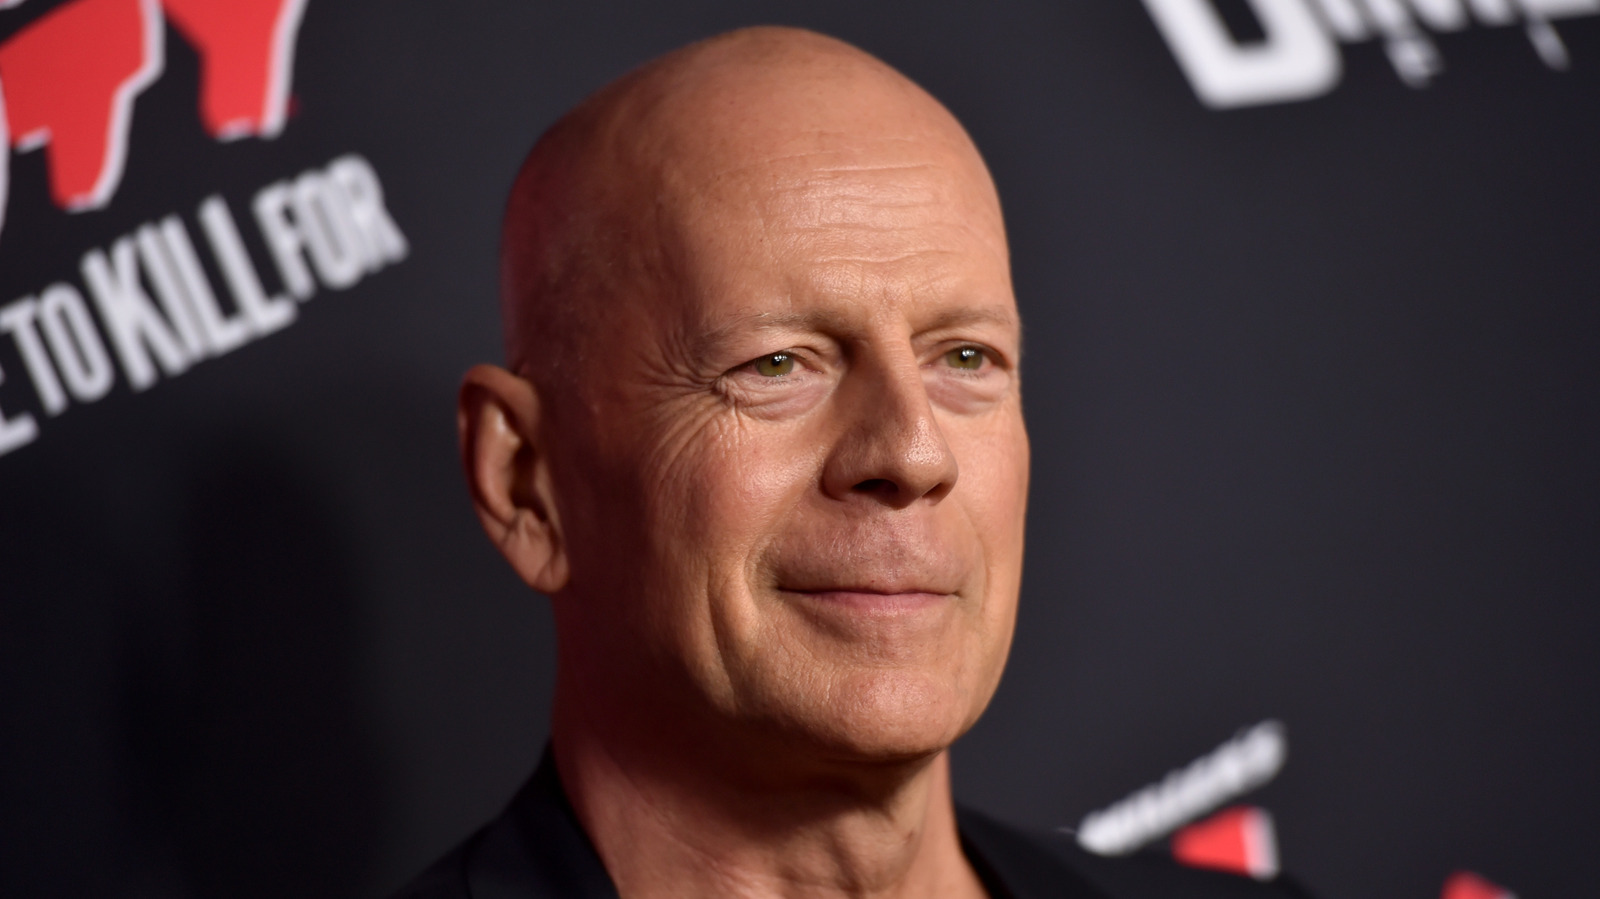 The Real Reason Bruce Willis Didn't Want To Kiss Jennifer Aniston